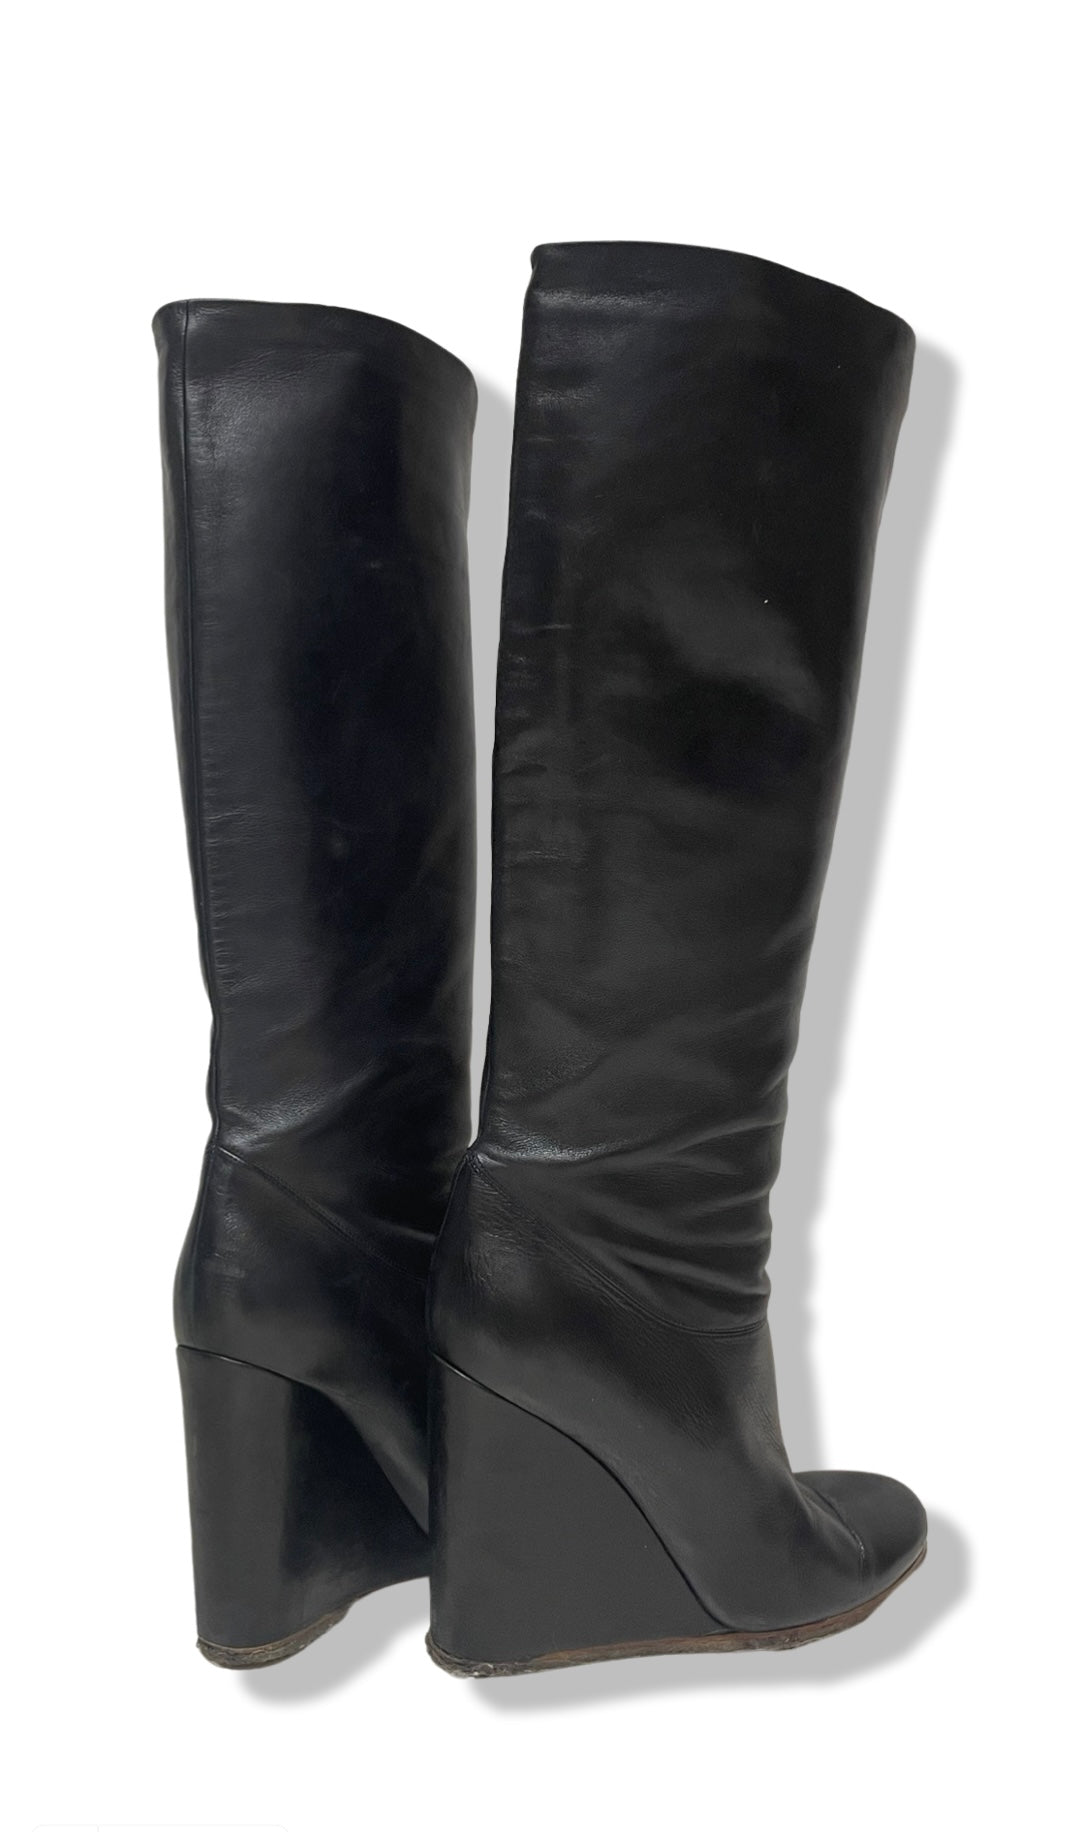 High leather boots by Lanvin.